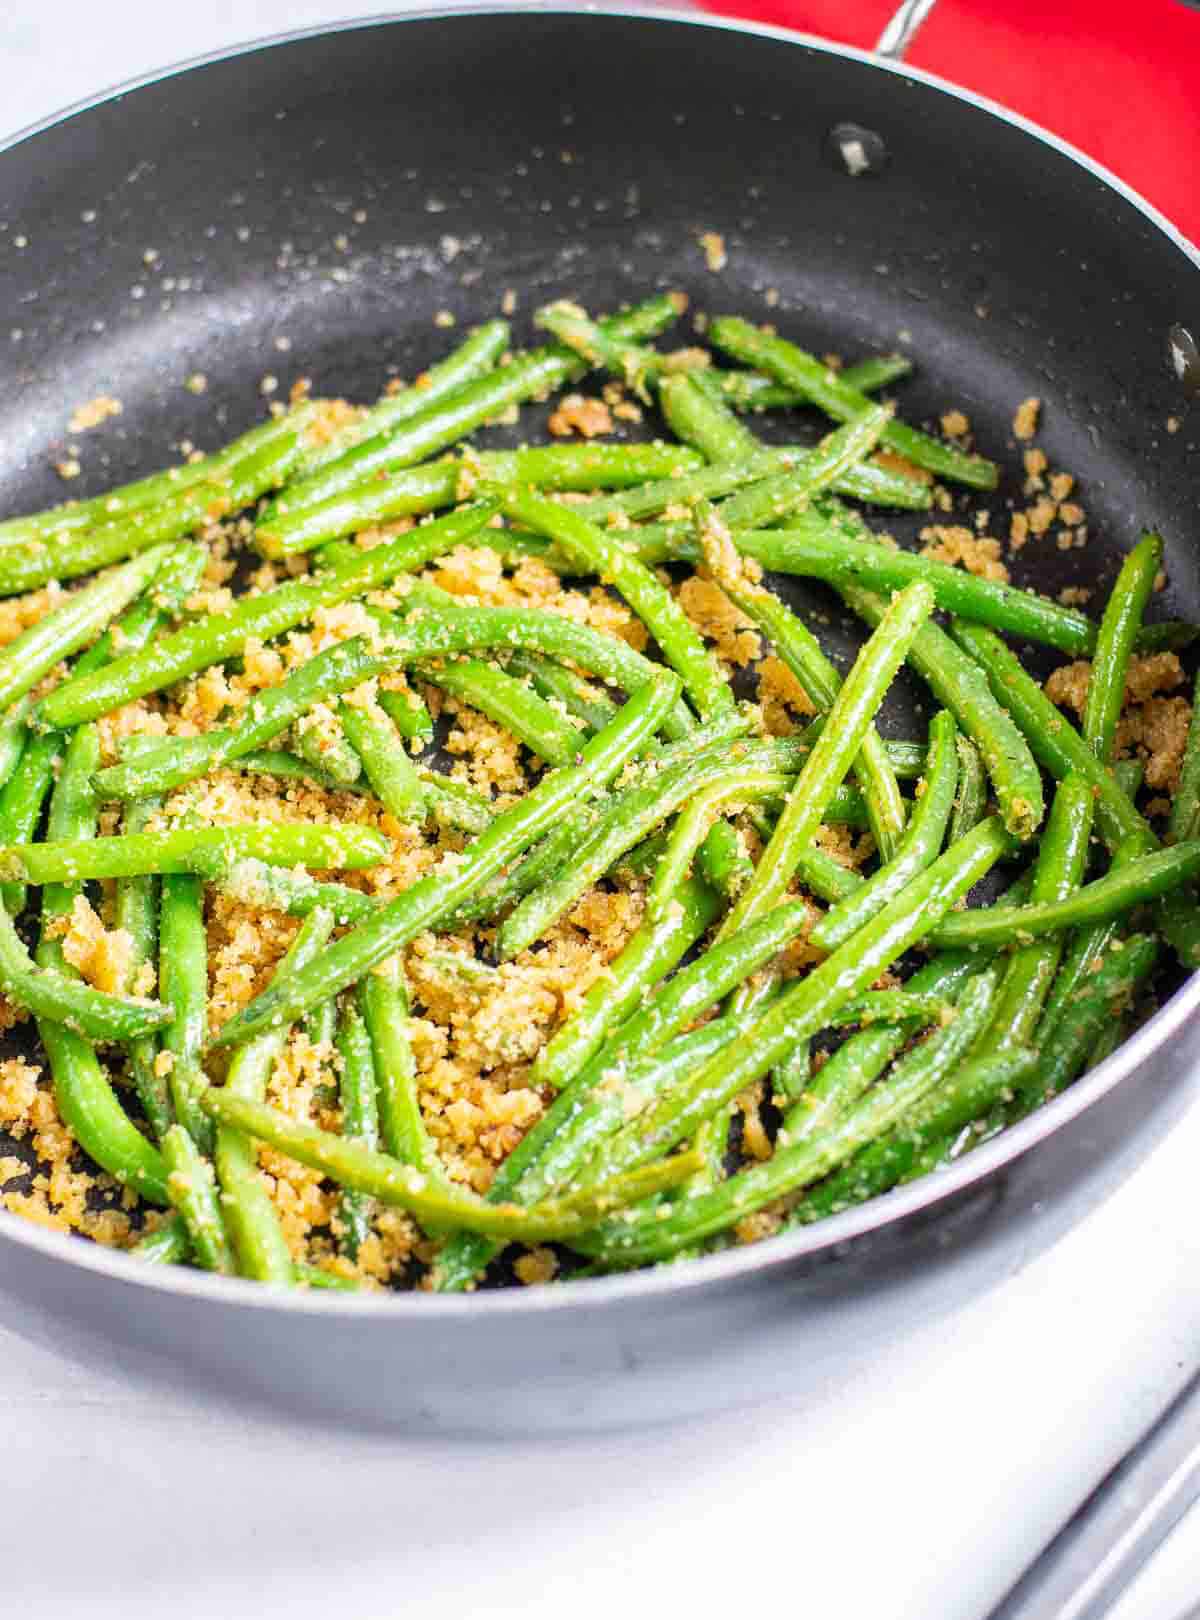 skillet of cooked green beans with bread crumbs